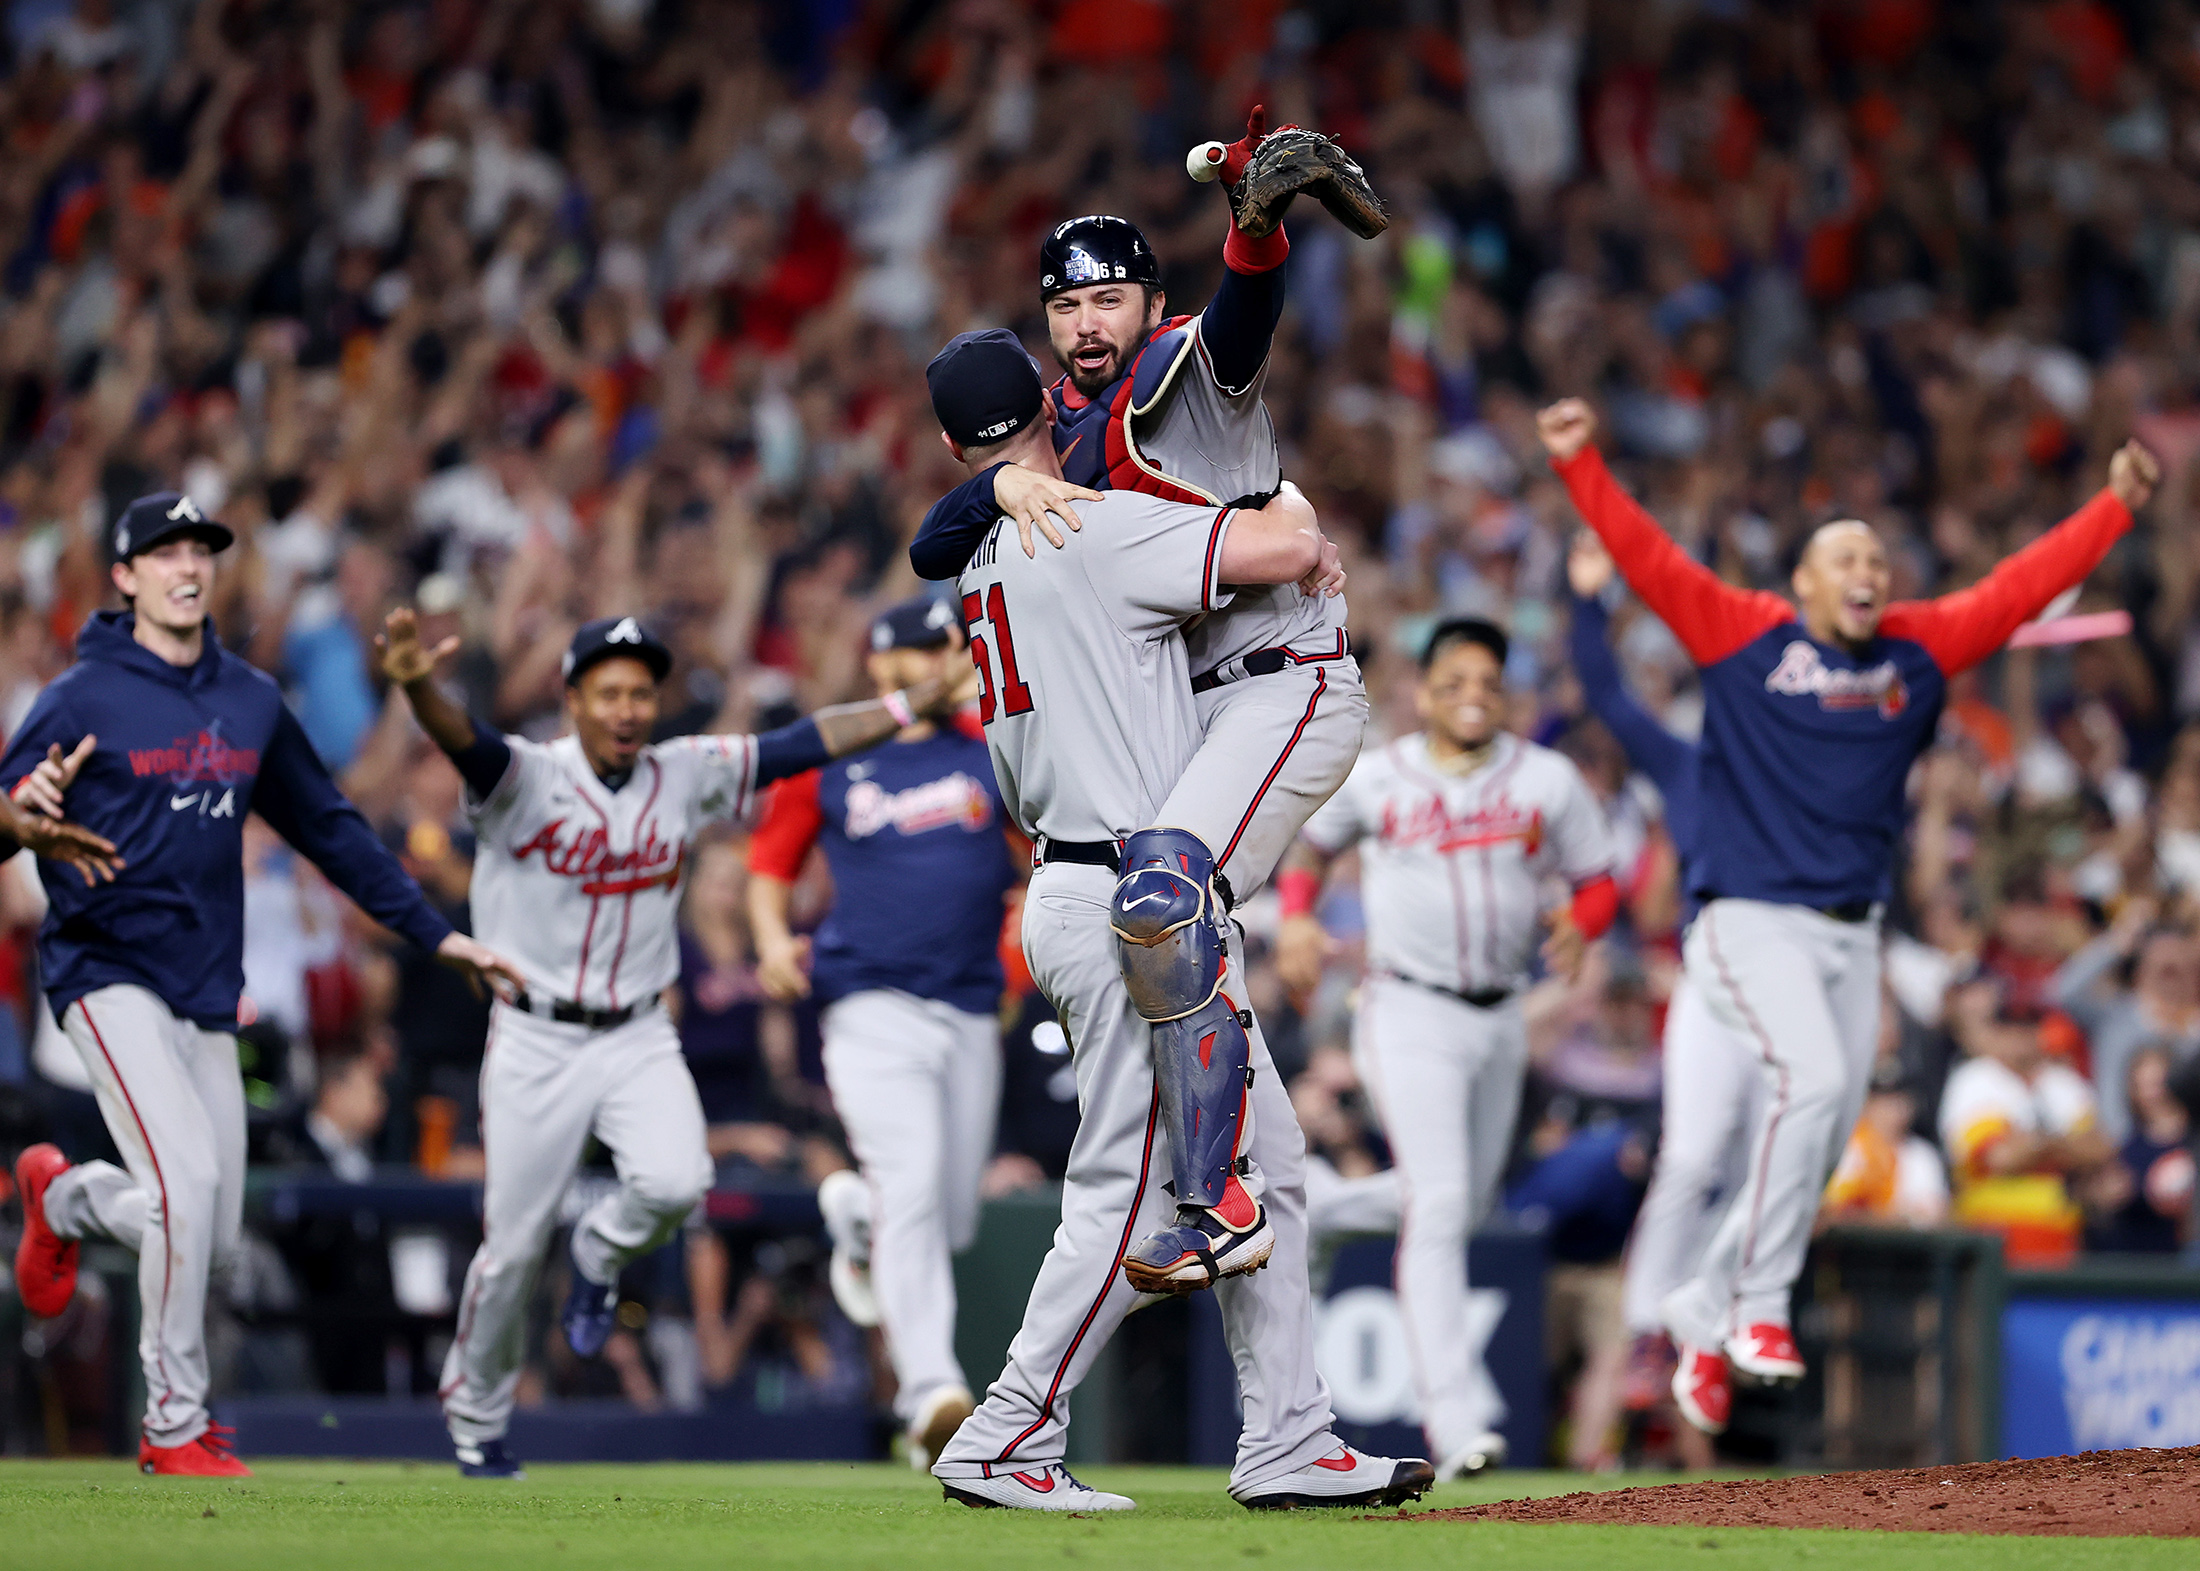 Atlanta Braves Win First World Series Title Since 1995 After Beating Astros 